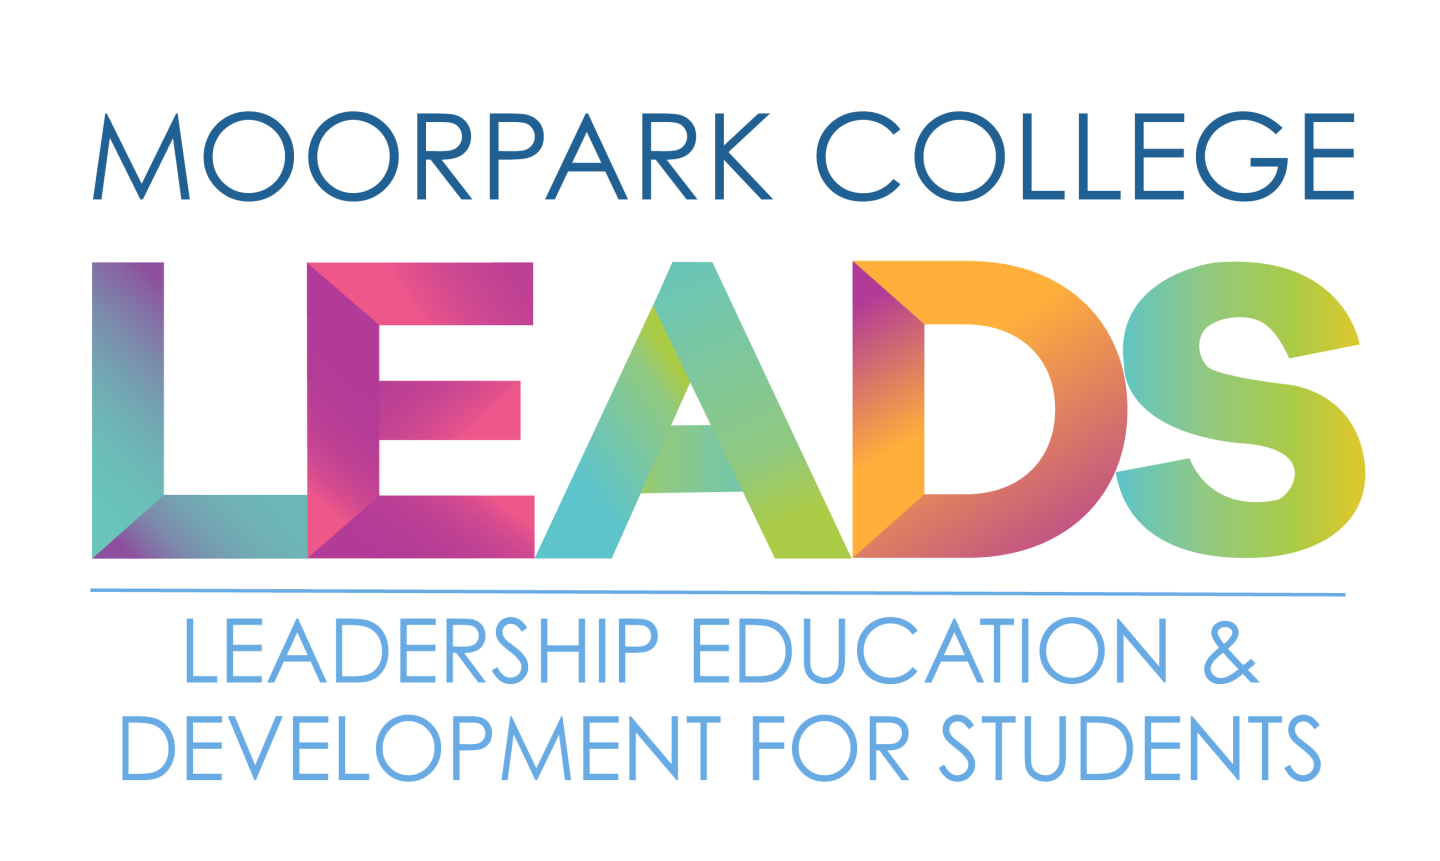 Moorpark College Leadership Education and Development for Students logo shown.